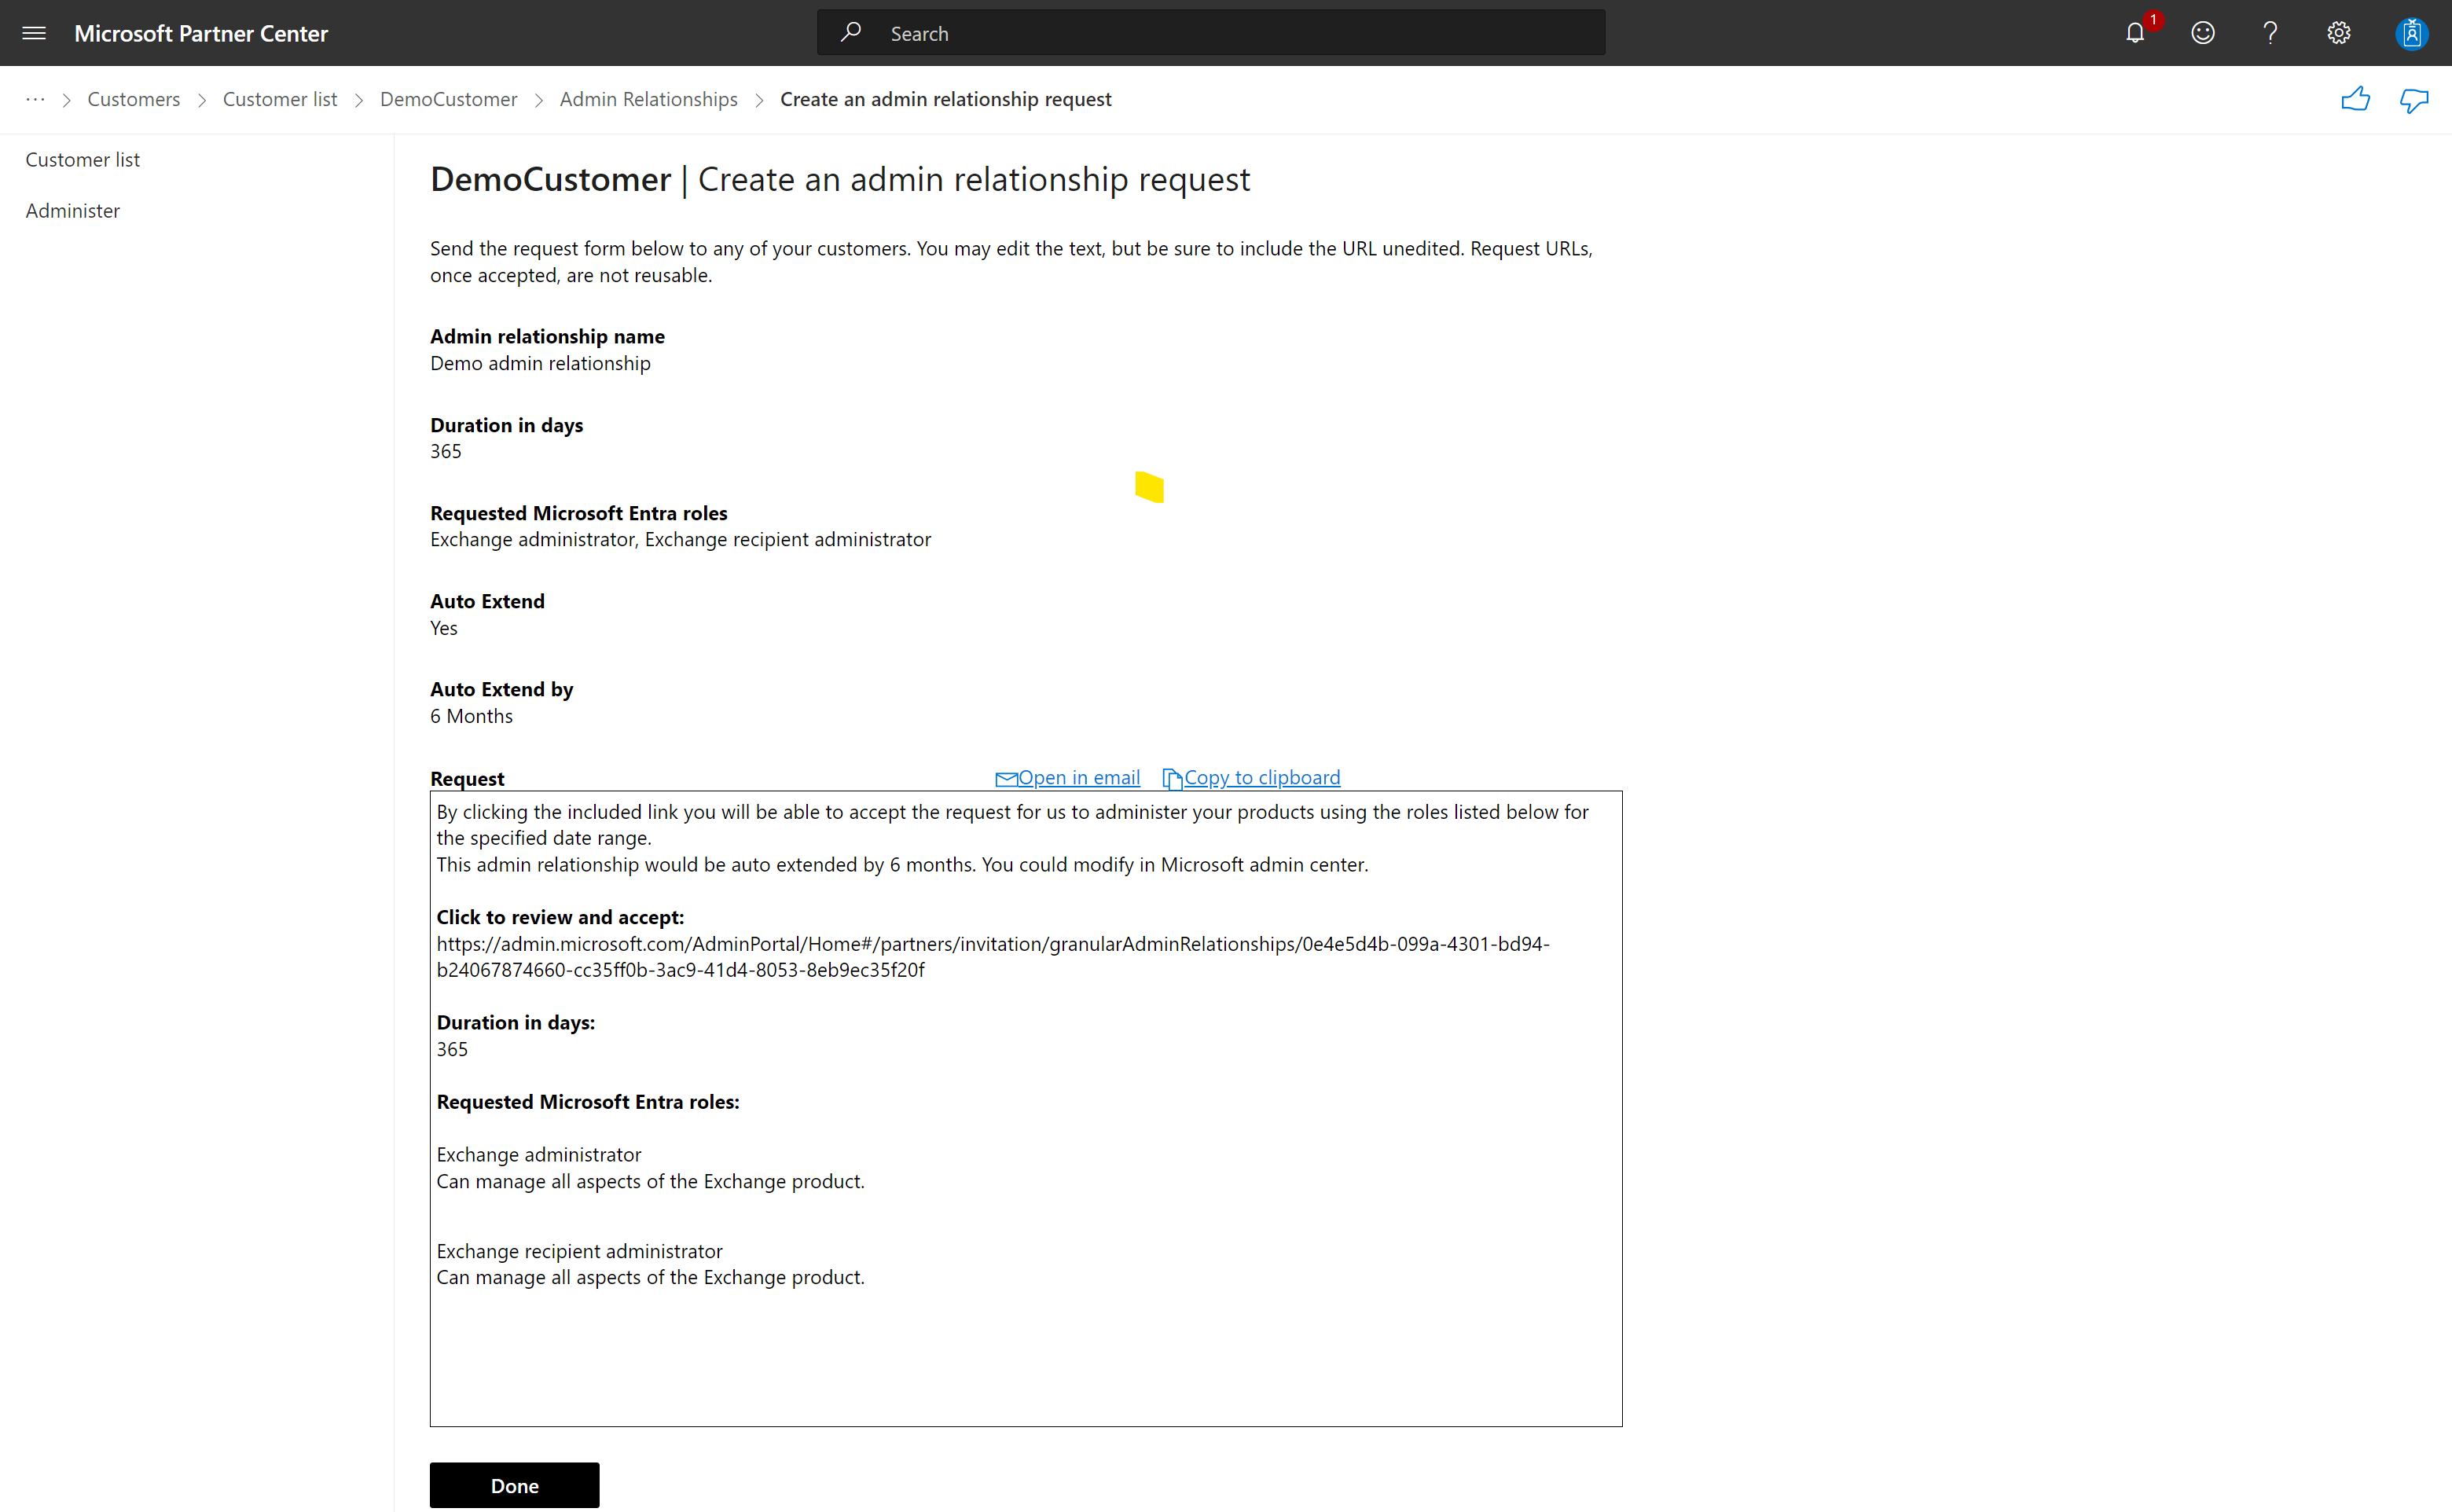 Screenshot showing the admin relationship request.